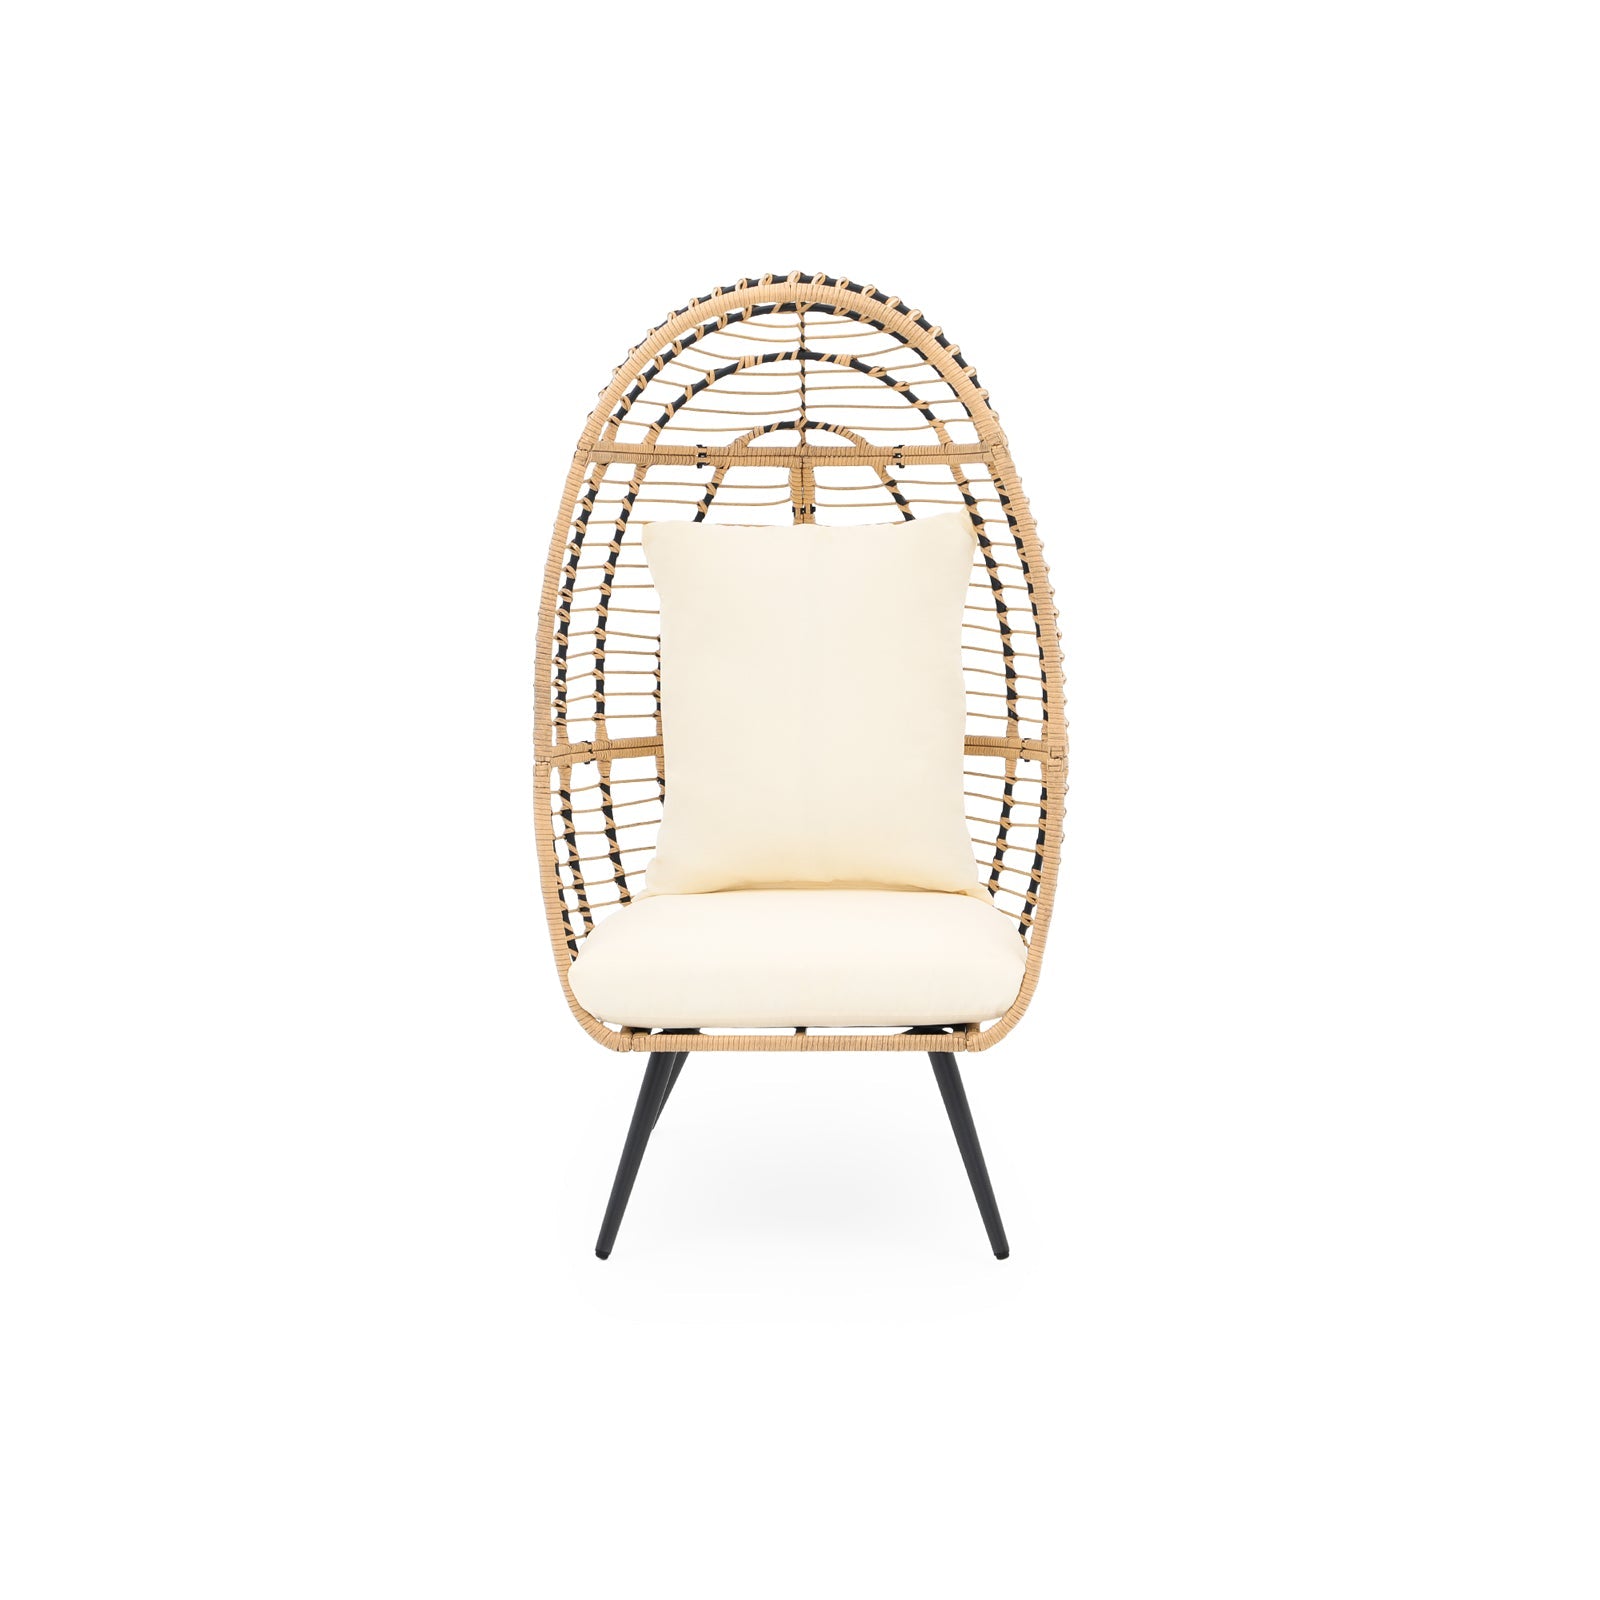 Oia Modern Wicker Outdoor Furniture, Egg Chair with 4 metal legs stands, Natural Rattan Design, white seat and back cushions, front view - Jardina Furniture#Color_White